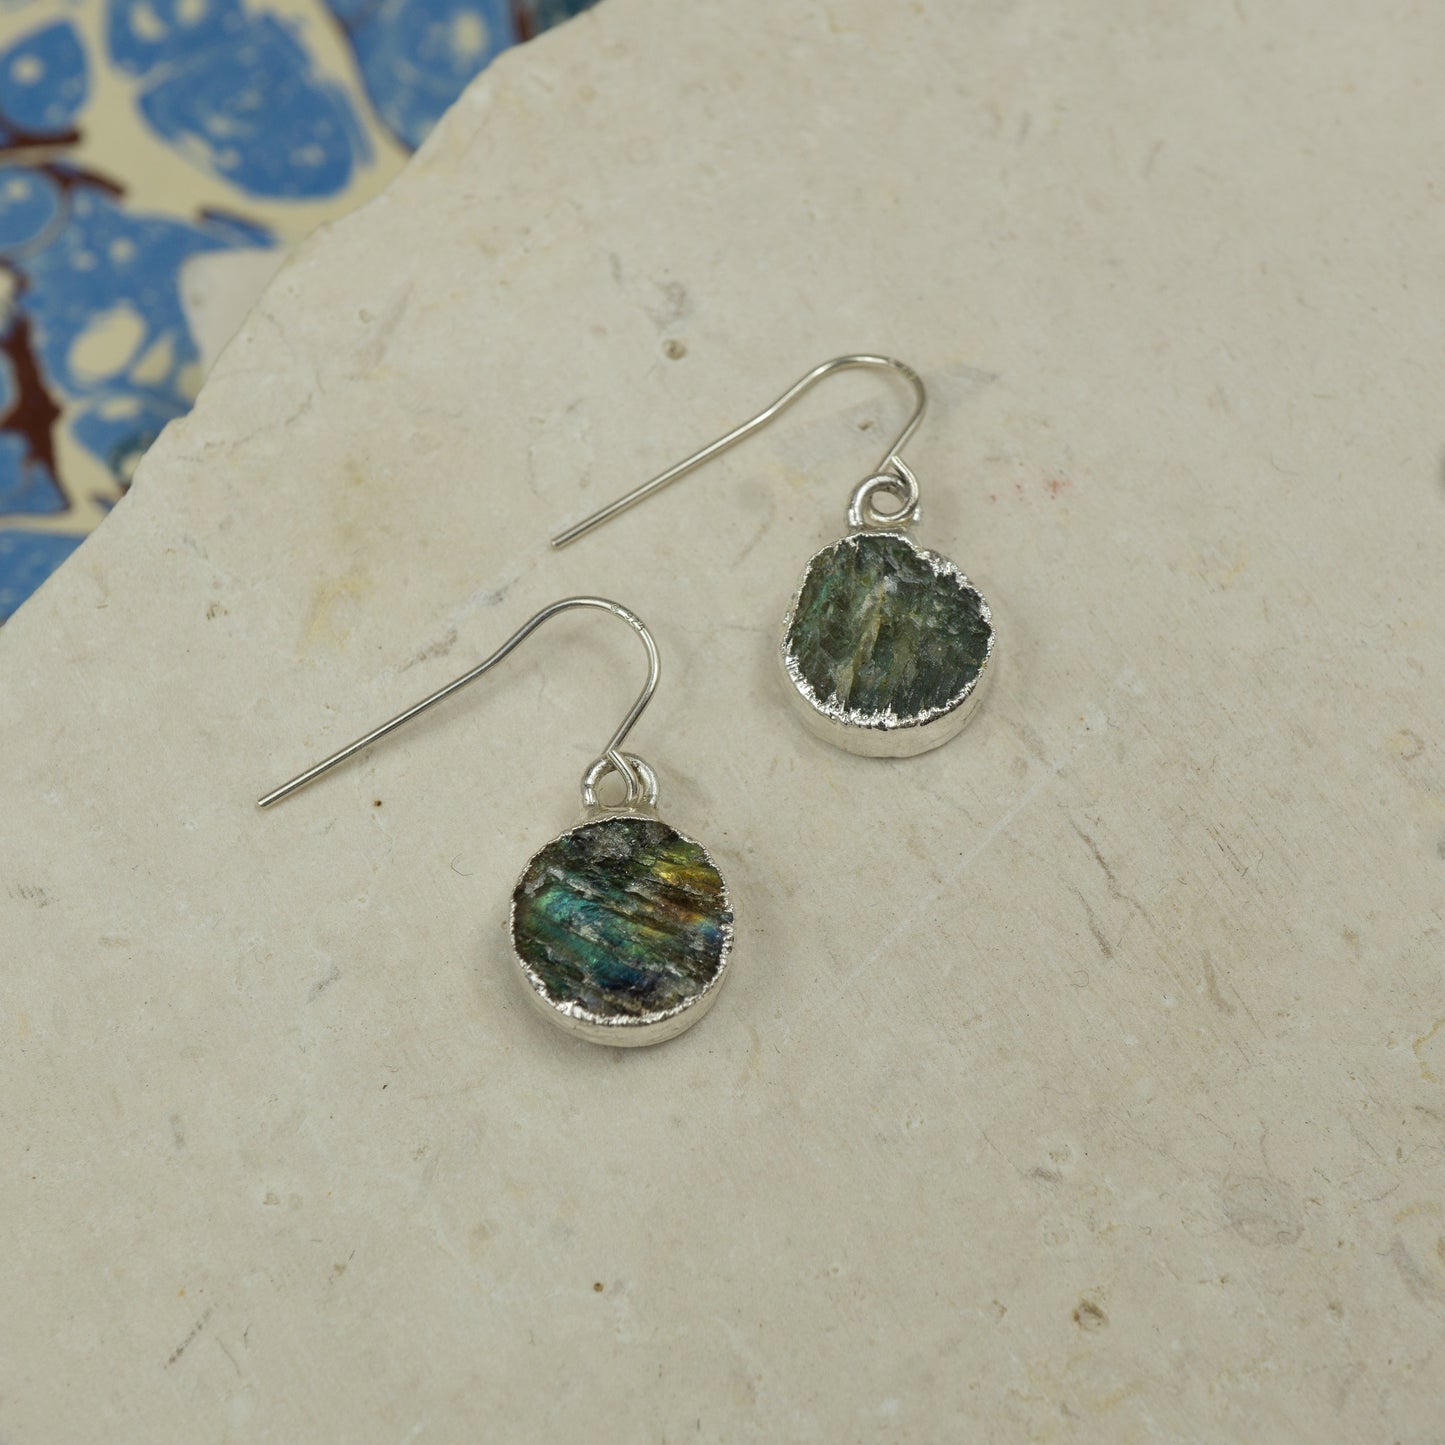 Round raw Labradorite earrings on hooks finished in silver